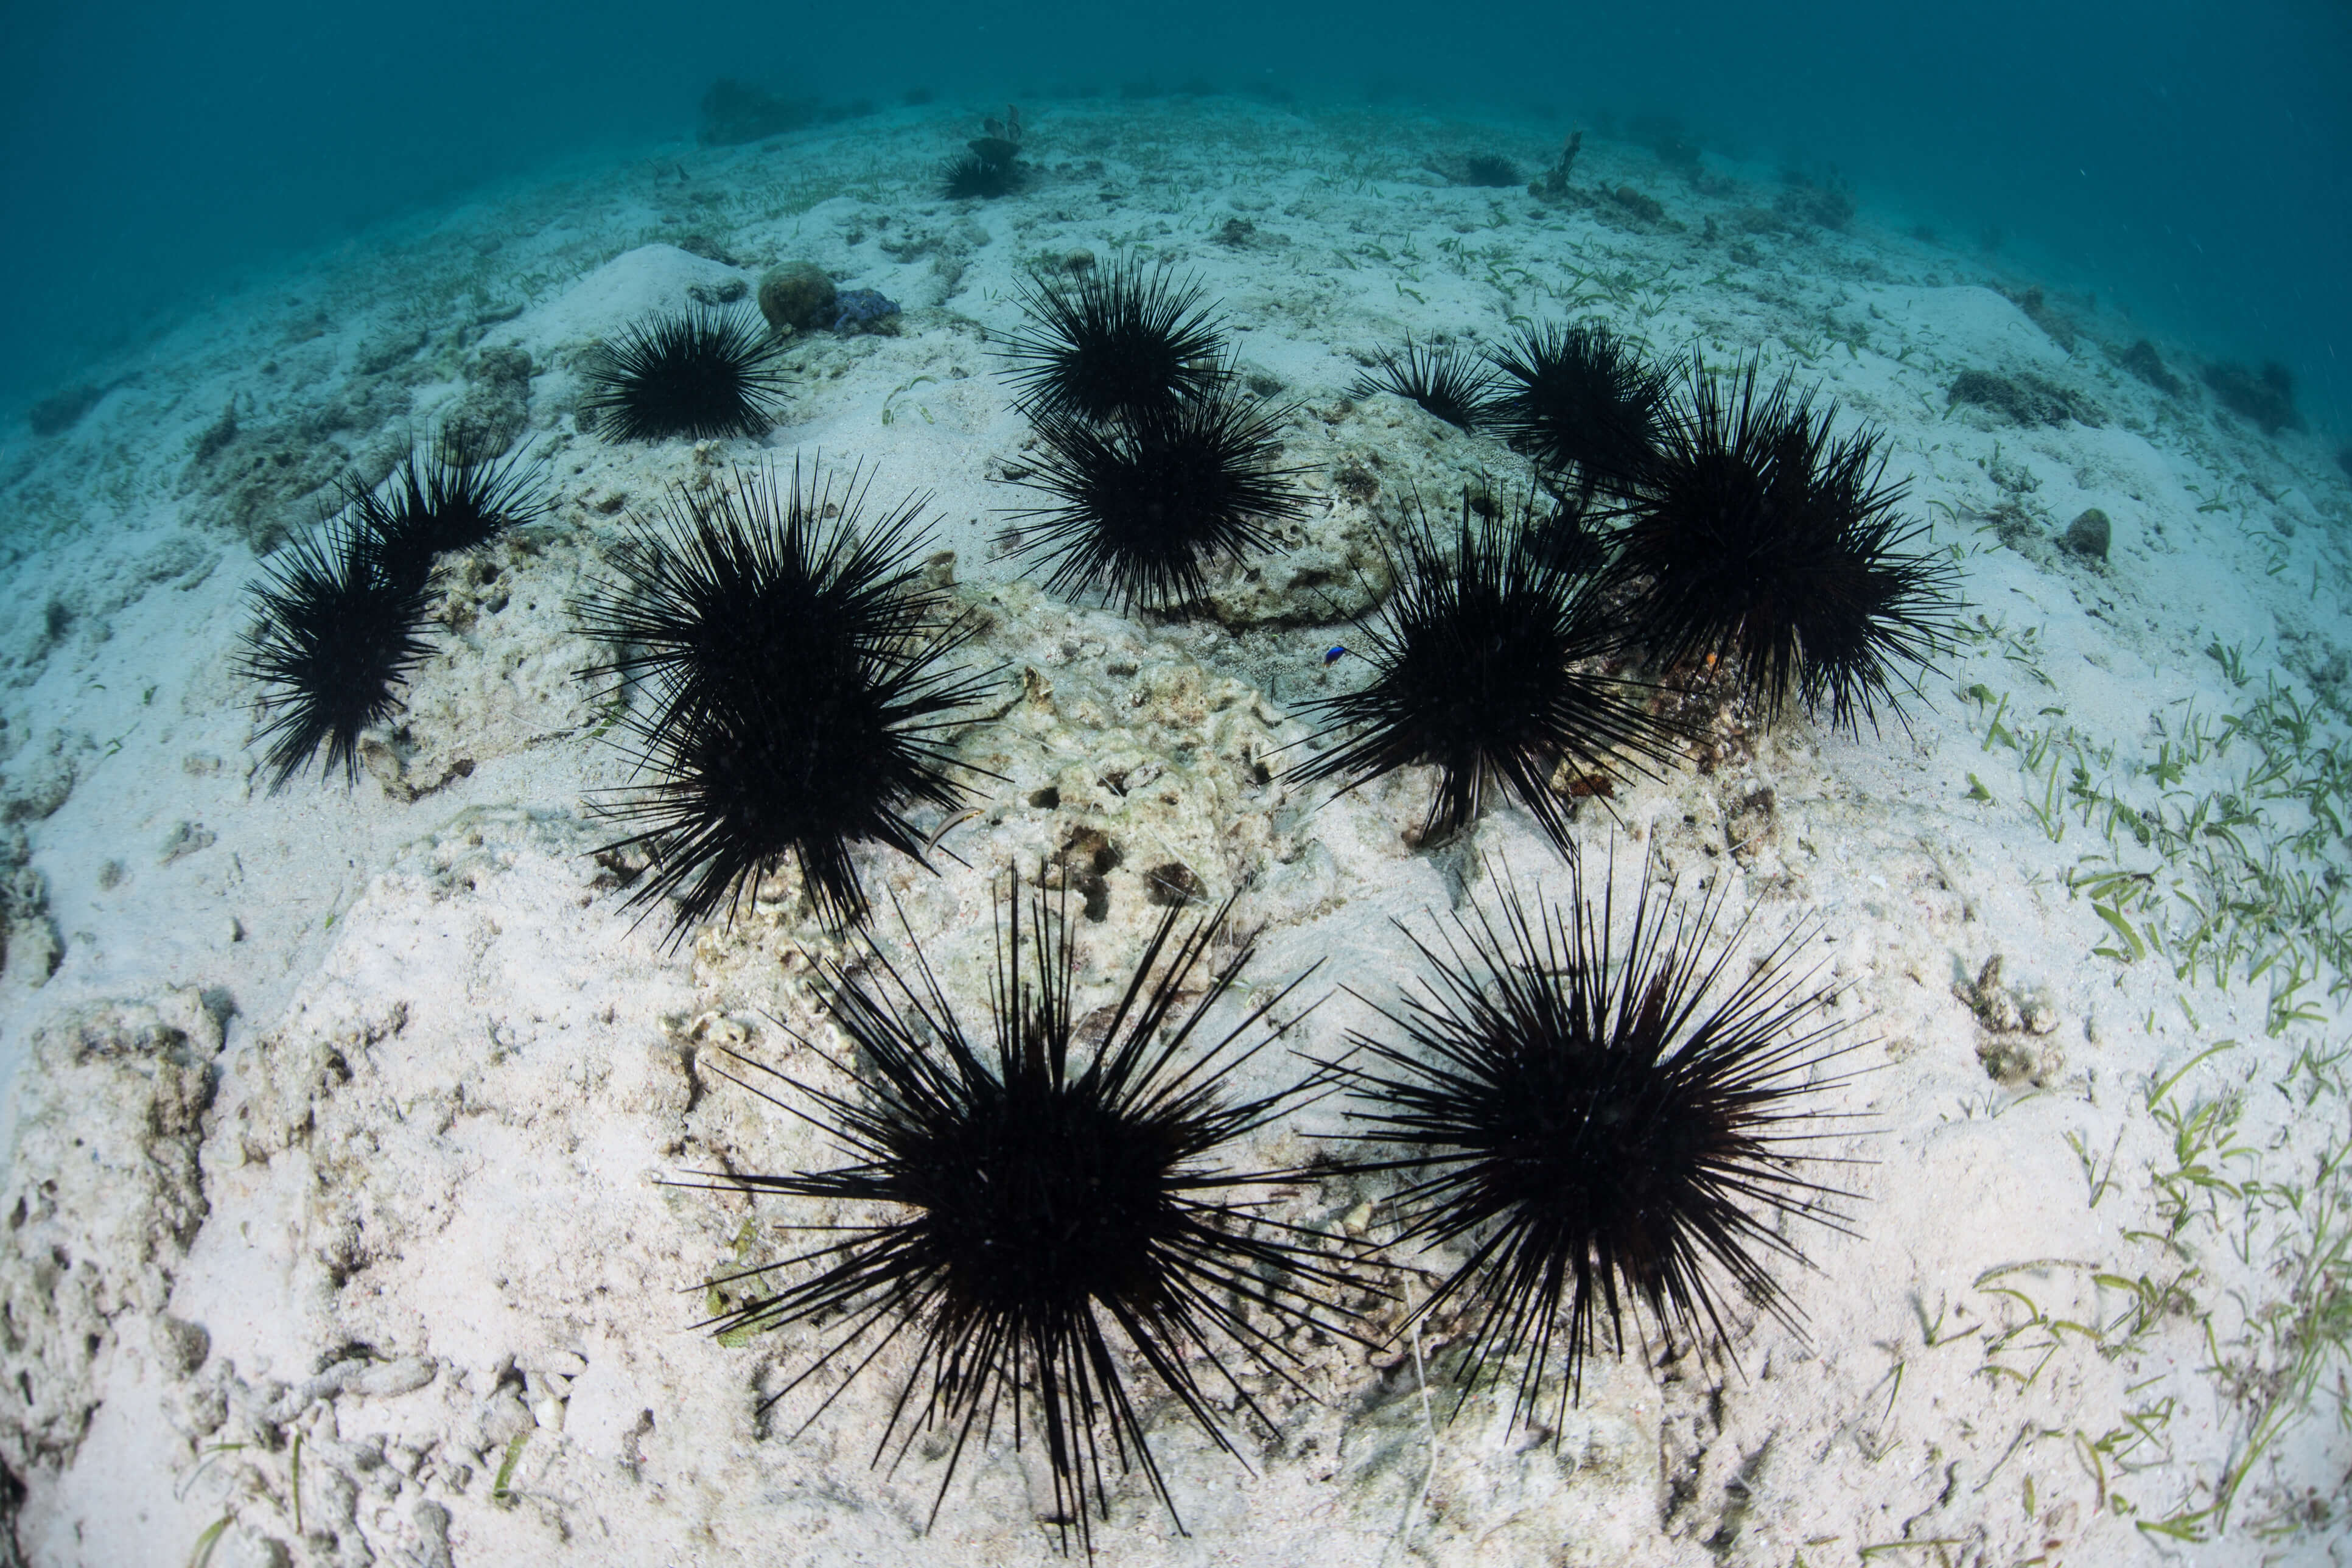 The Sea Urchin Problem for Eastern Victoria